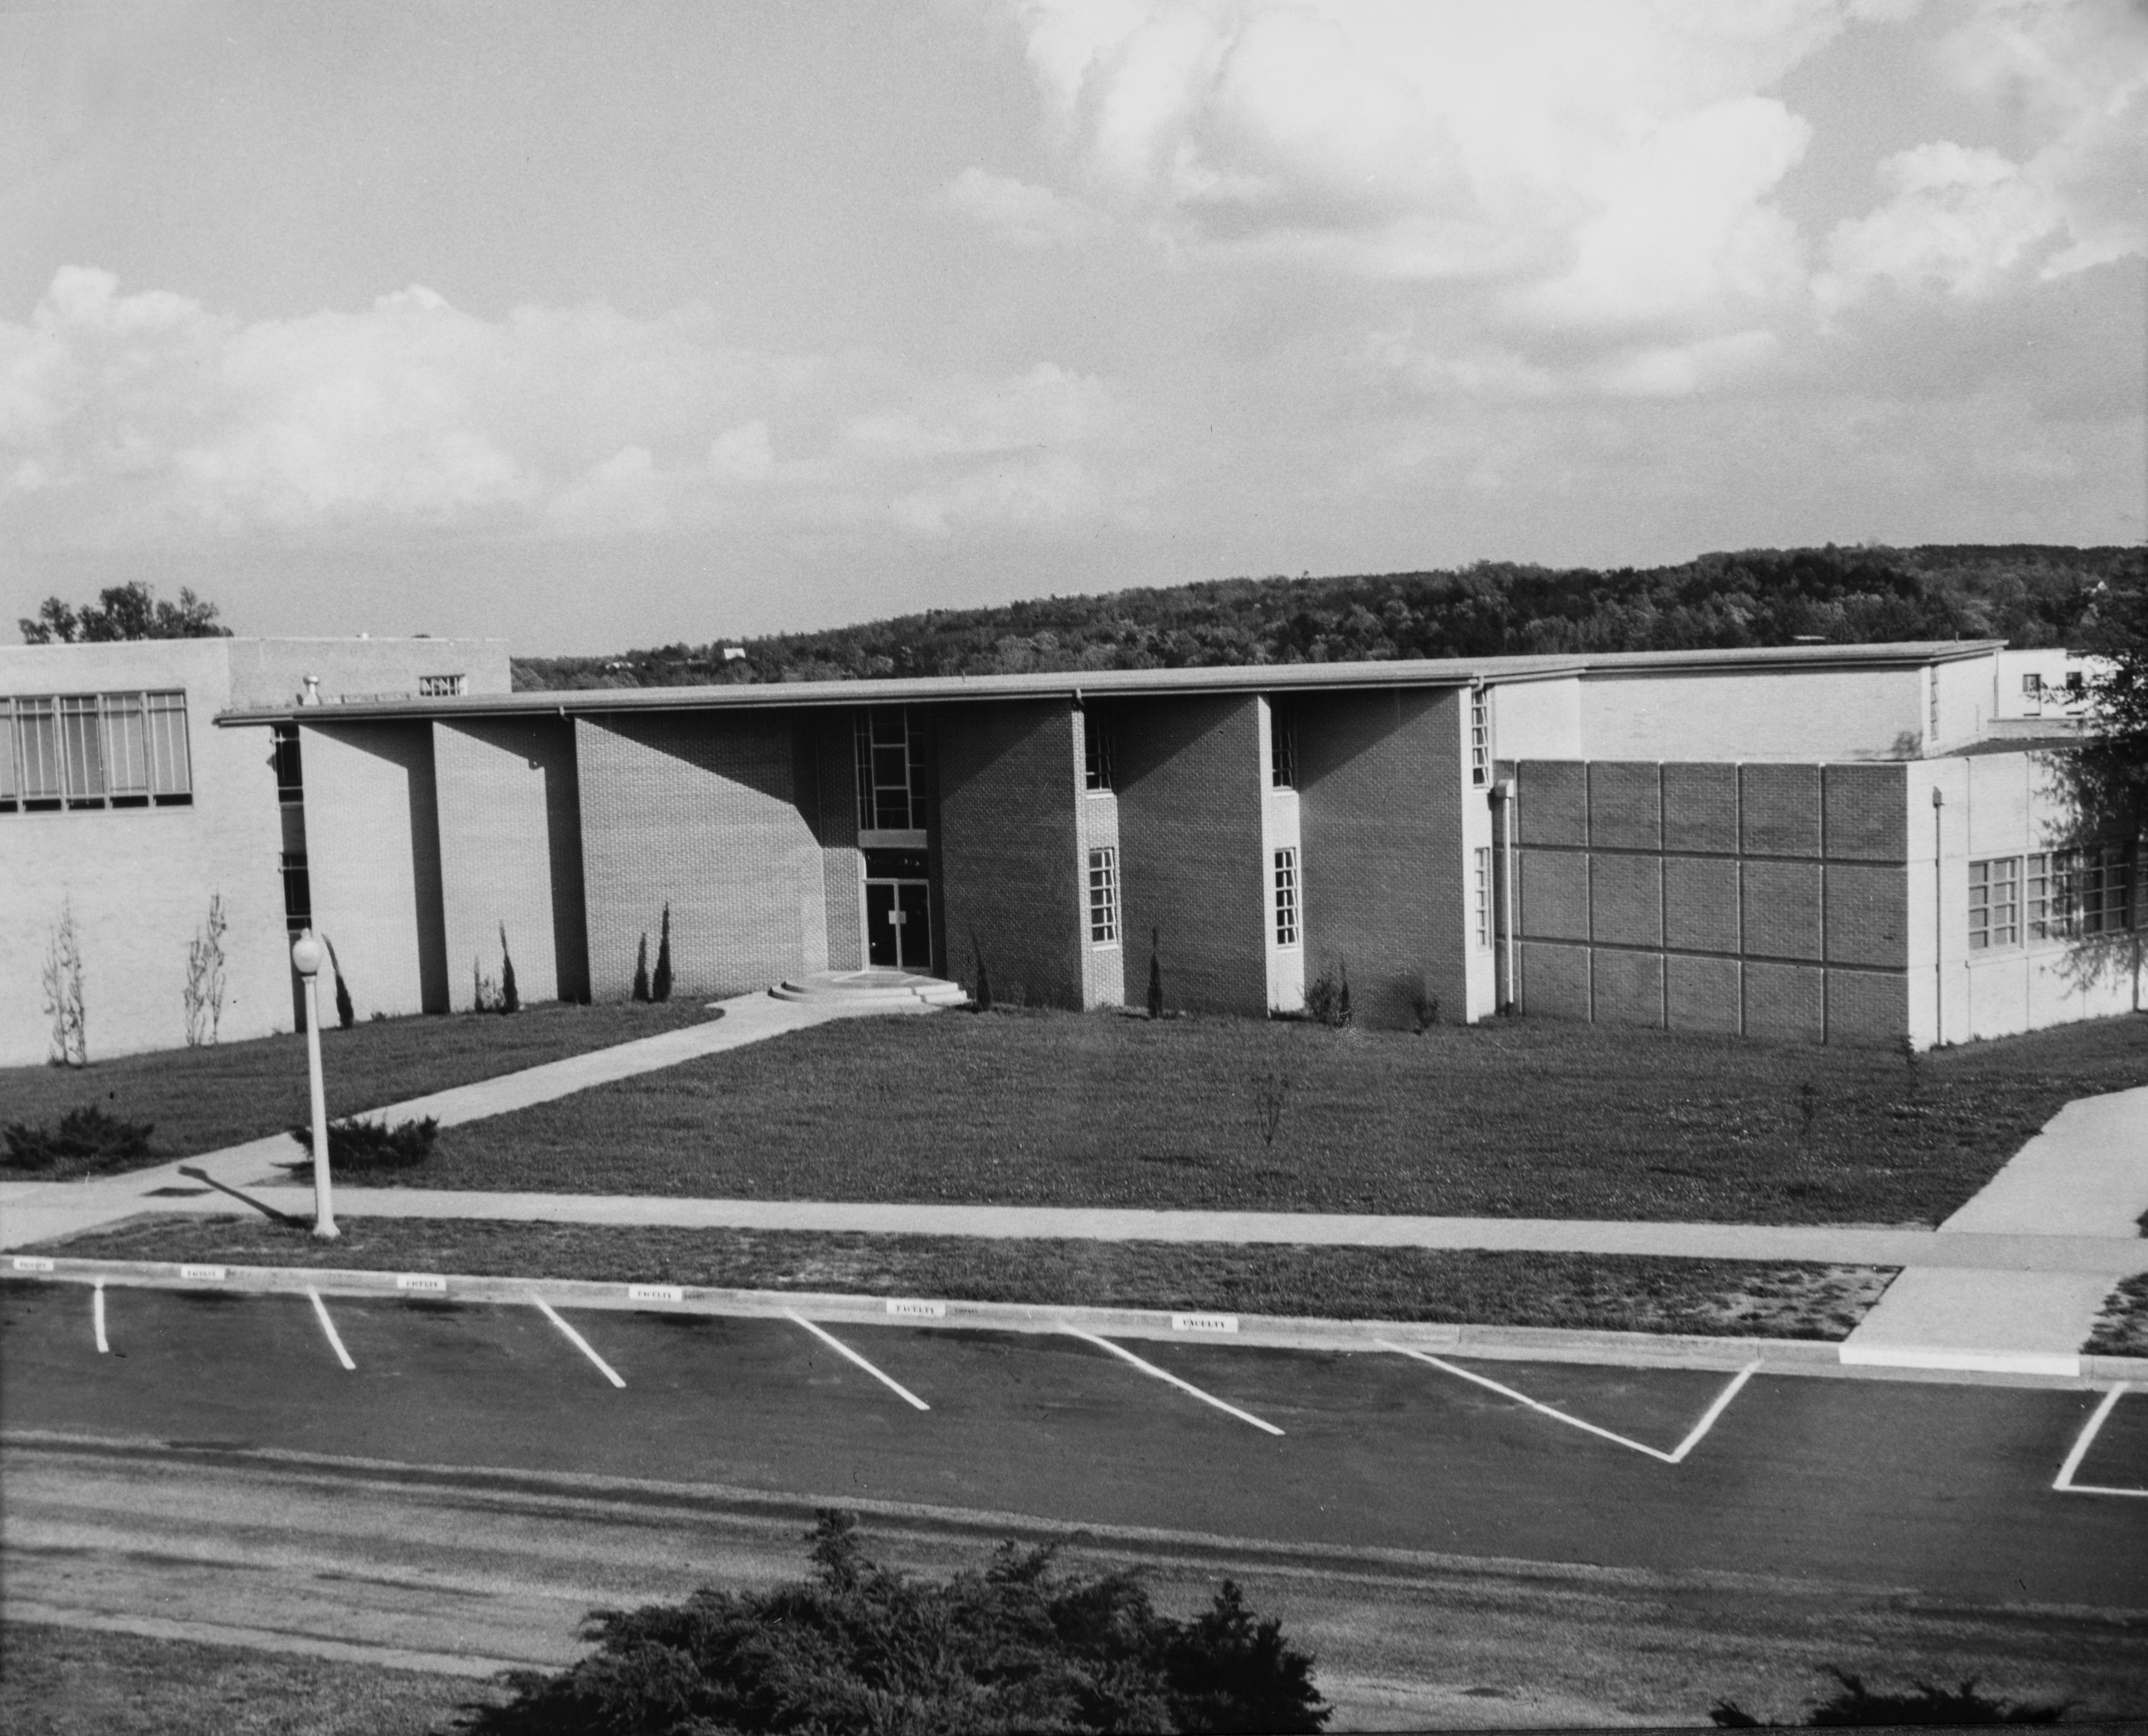 The exterior of the Fine Arts building, 1950s